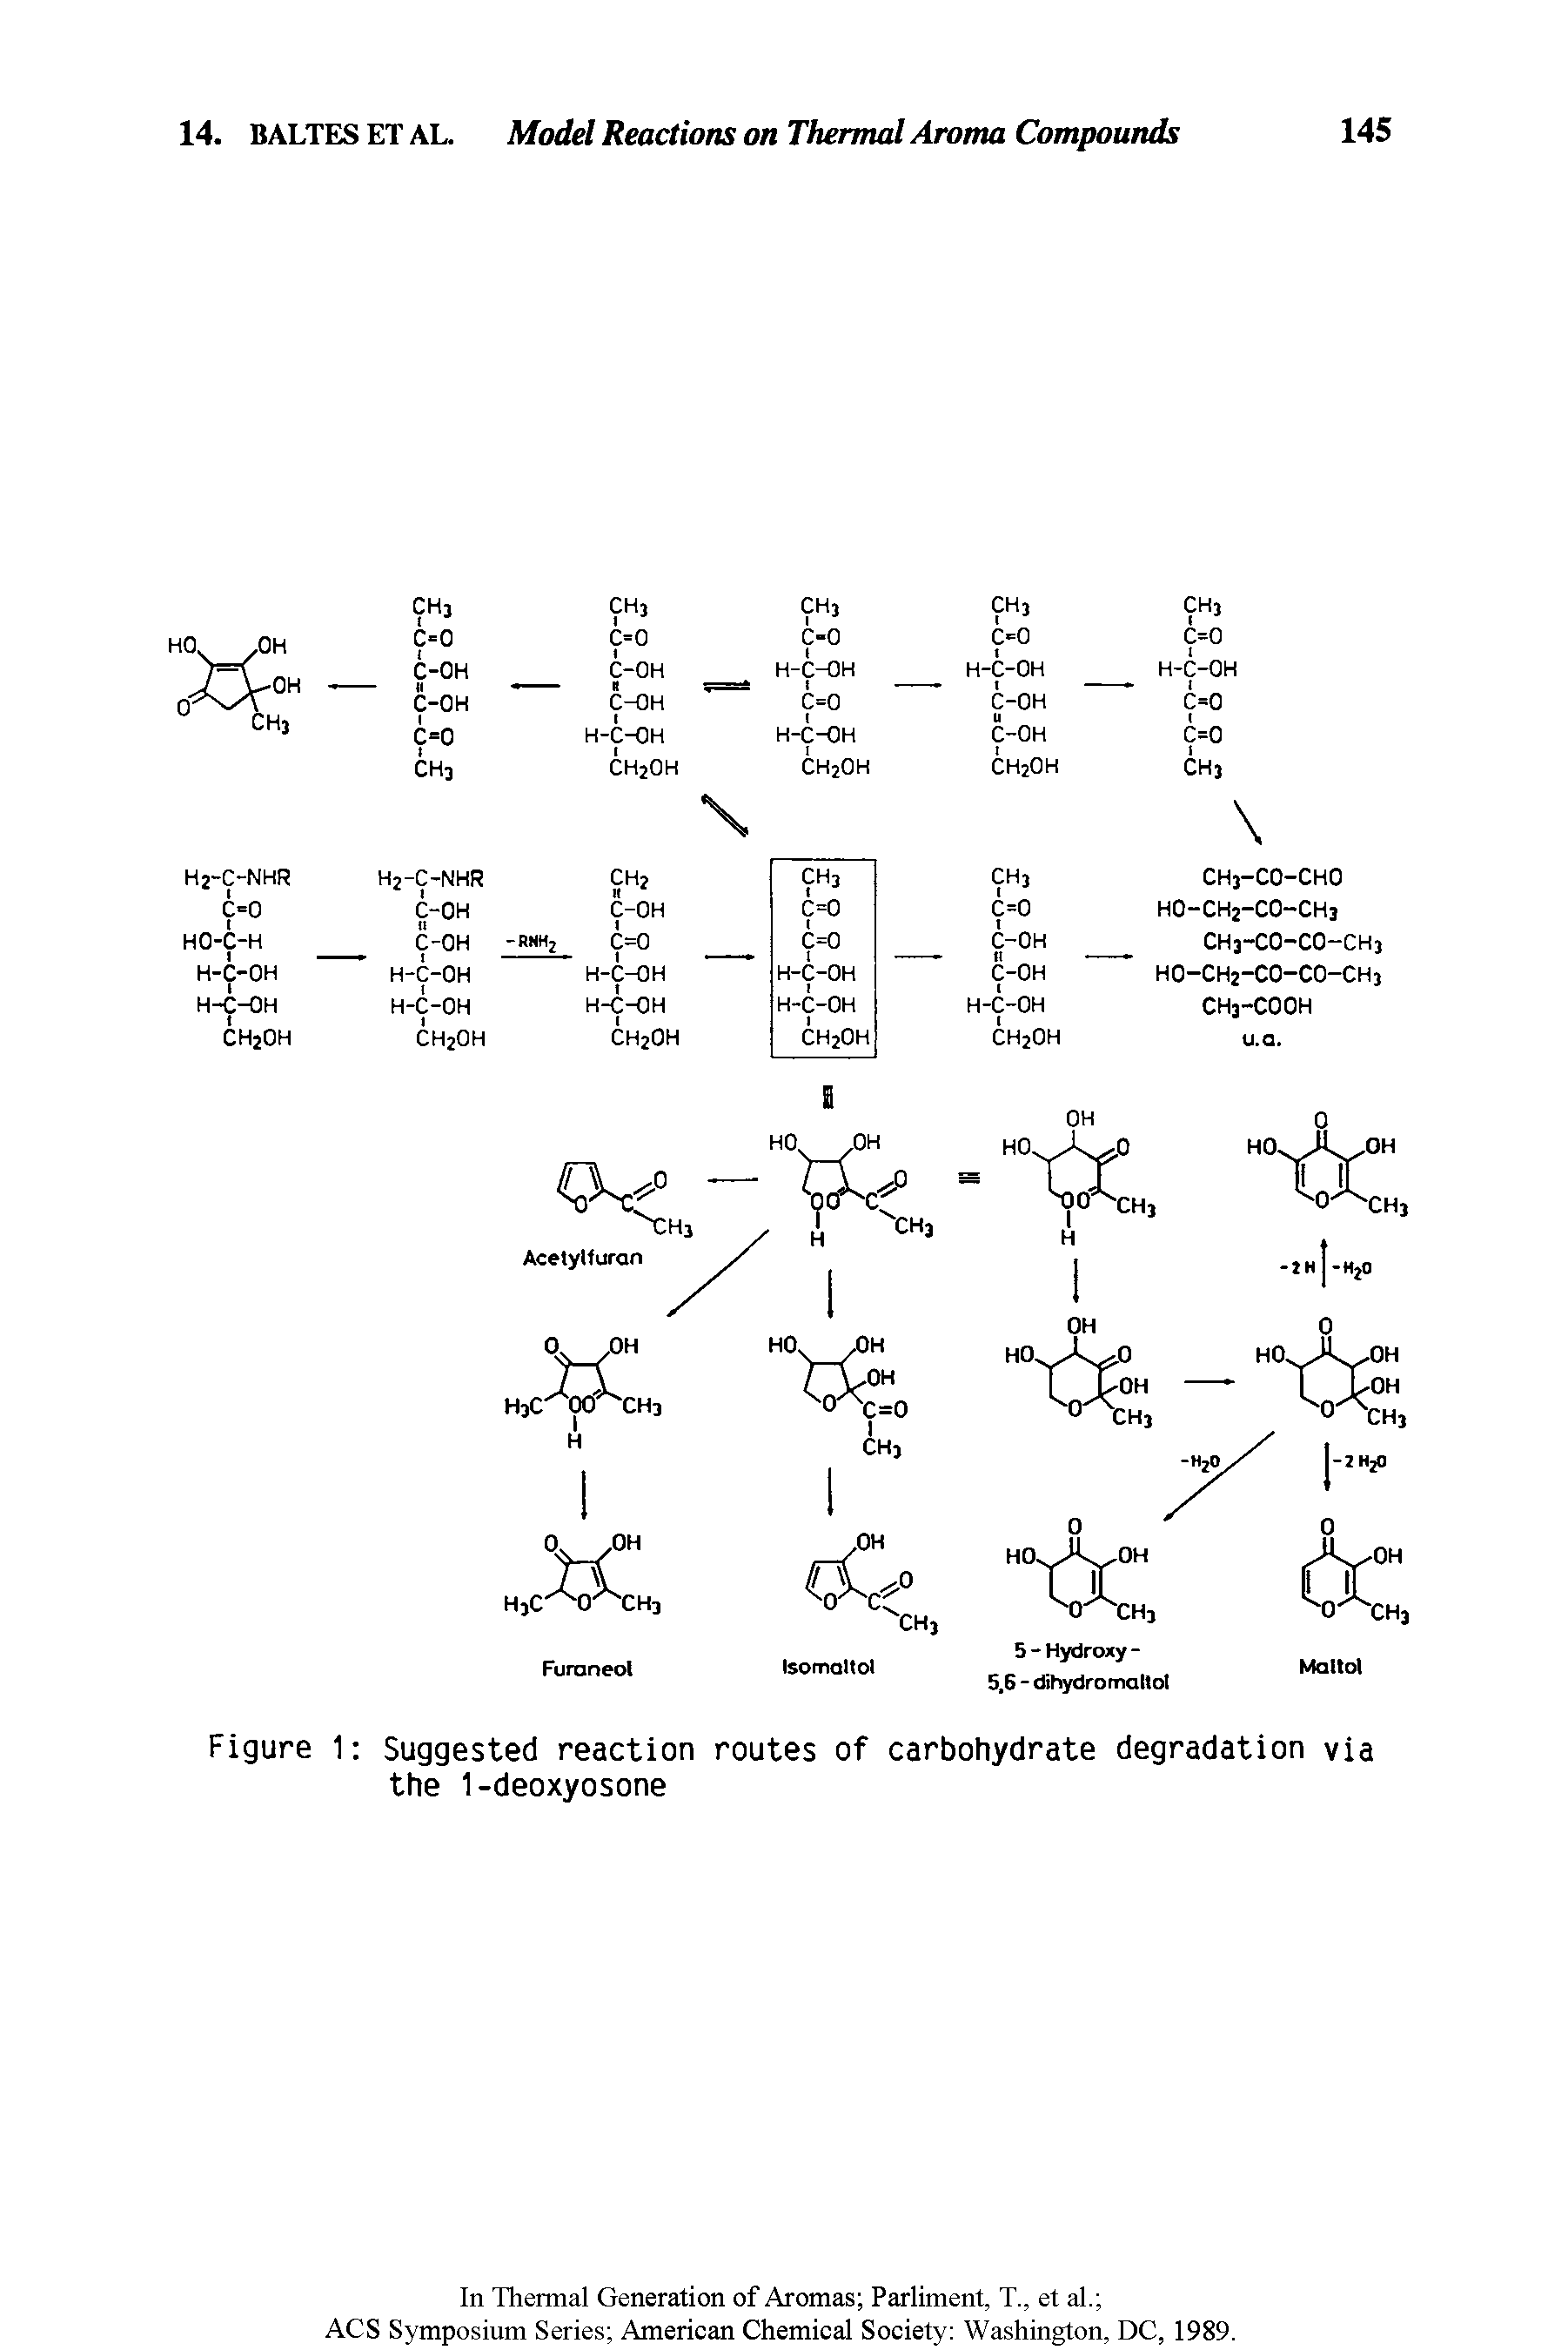 Figure 1 Suggested reaction routes of carbohydrate degradation via the 1-deoxyosone...